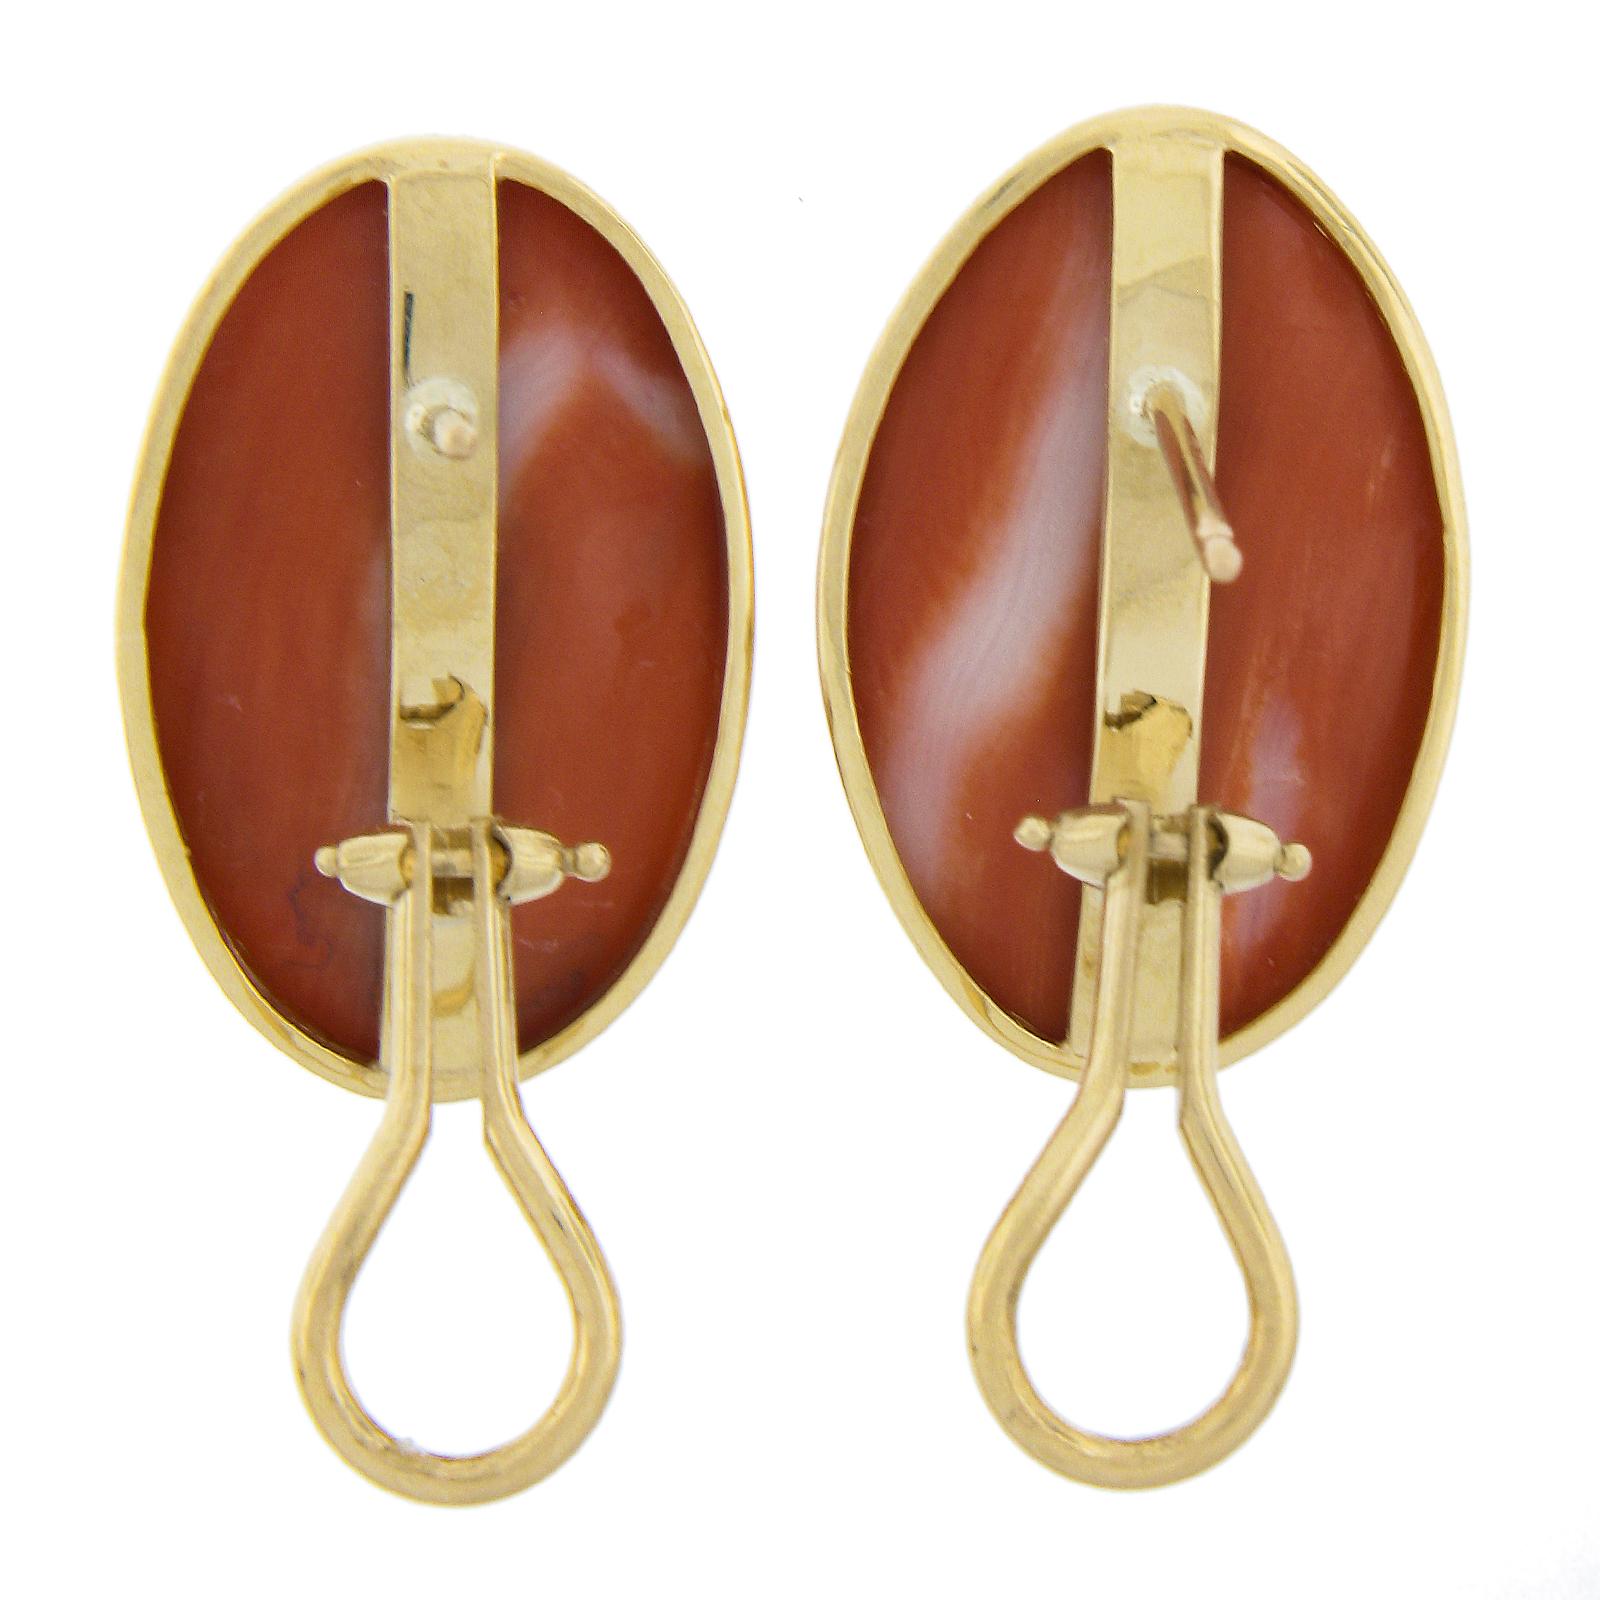 Vintage 18k Yellow Gold GIA Graded 28.94ctw Oval Cabochon Coral Omega Earrings For Sale 2